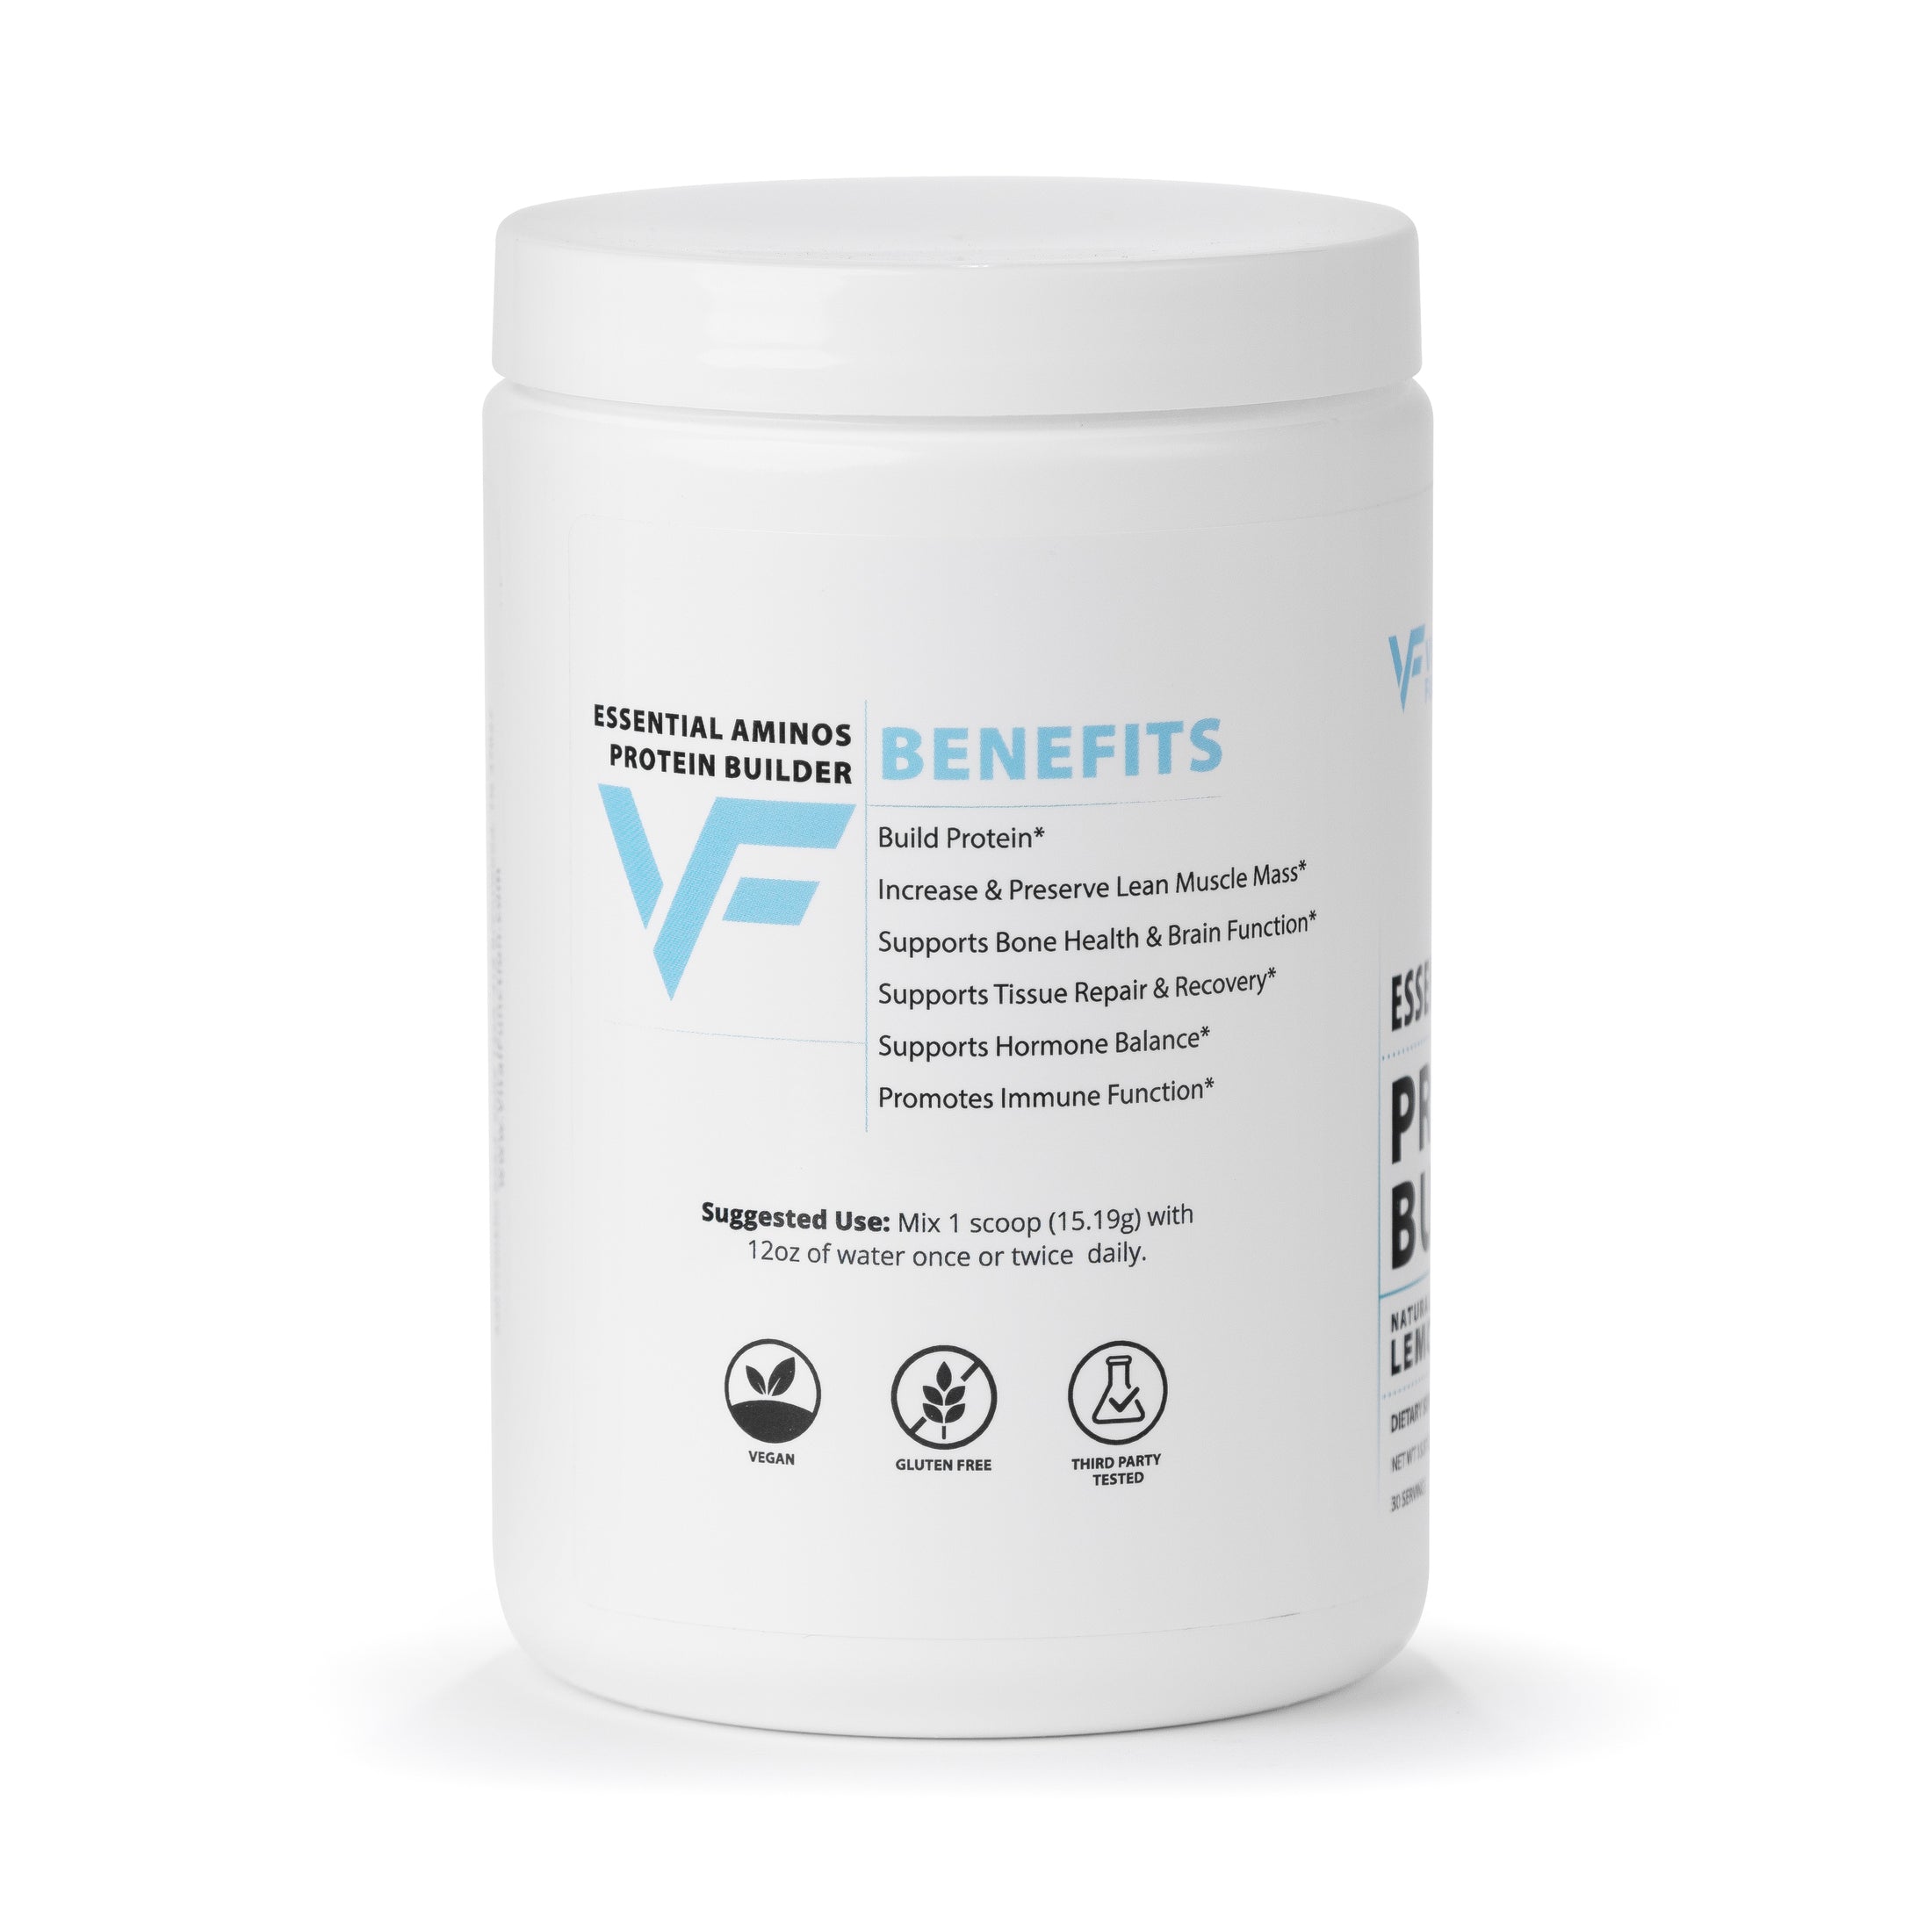  The benefits and serving suggestions included on the site of the amino protein powder tub 